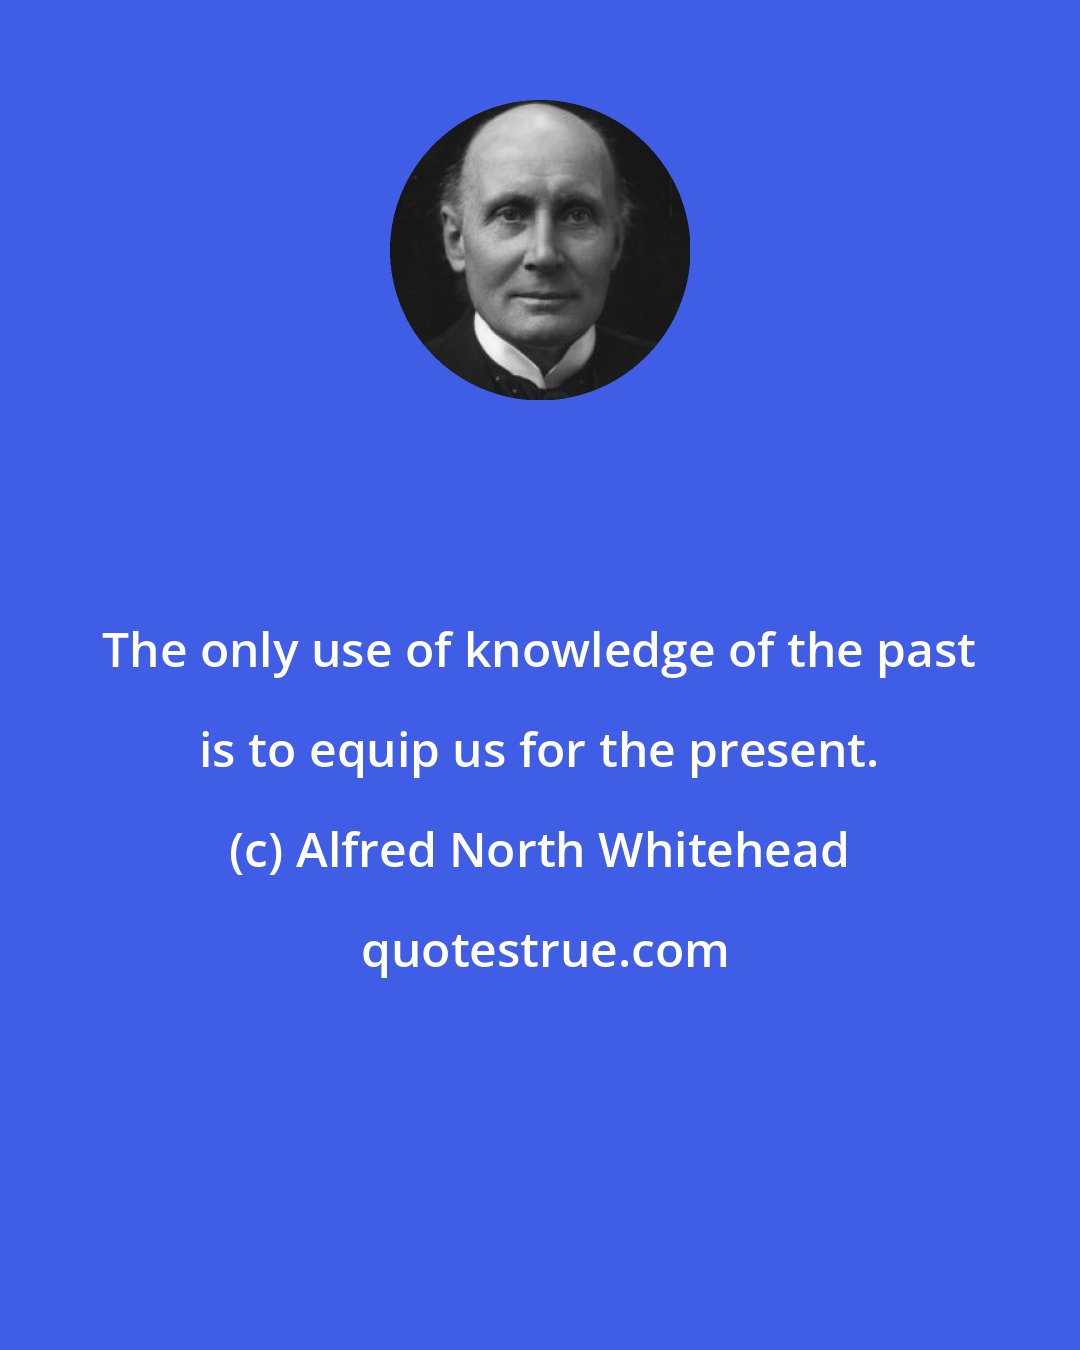 Alfred North Whitehead: The only use of knowledge of the past is to equip us for the present.